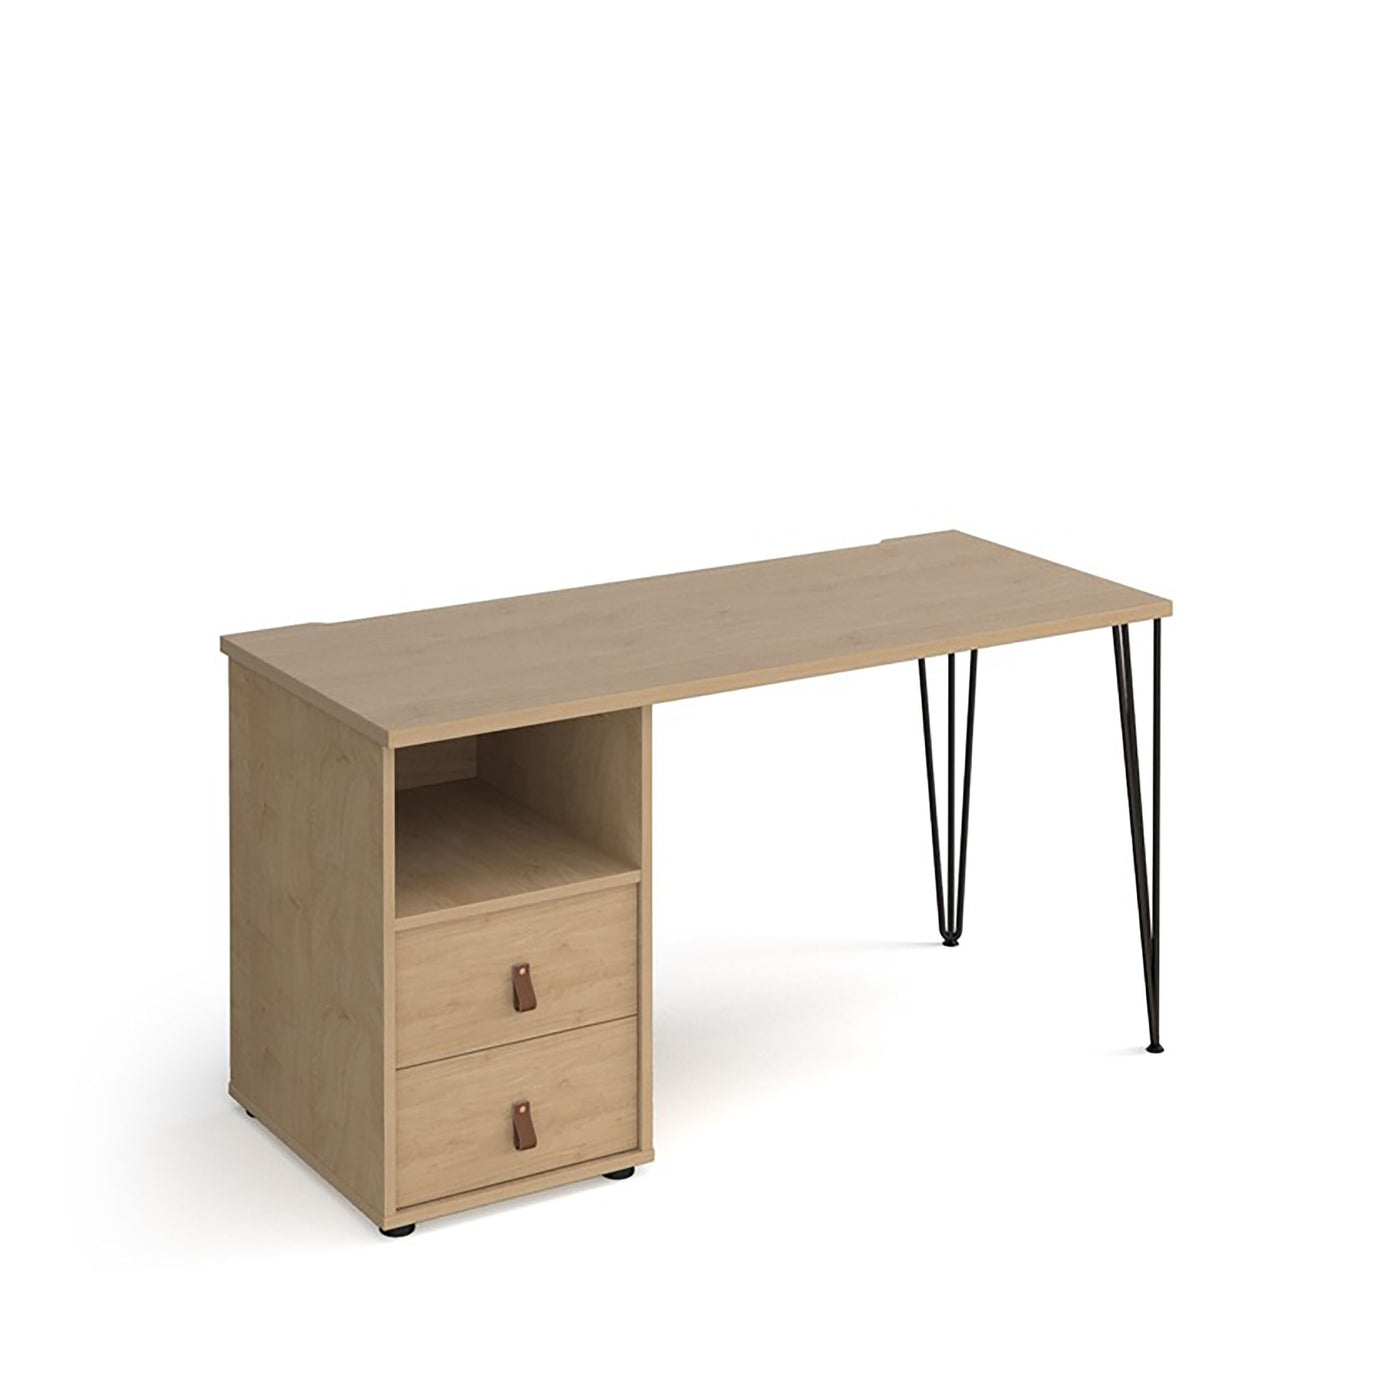 Tikal Desk with Drawers | Home Office Desk with Drawers | Home Office | Desk with storage | Home office furniture | home office furnishing | study desk with storage